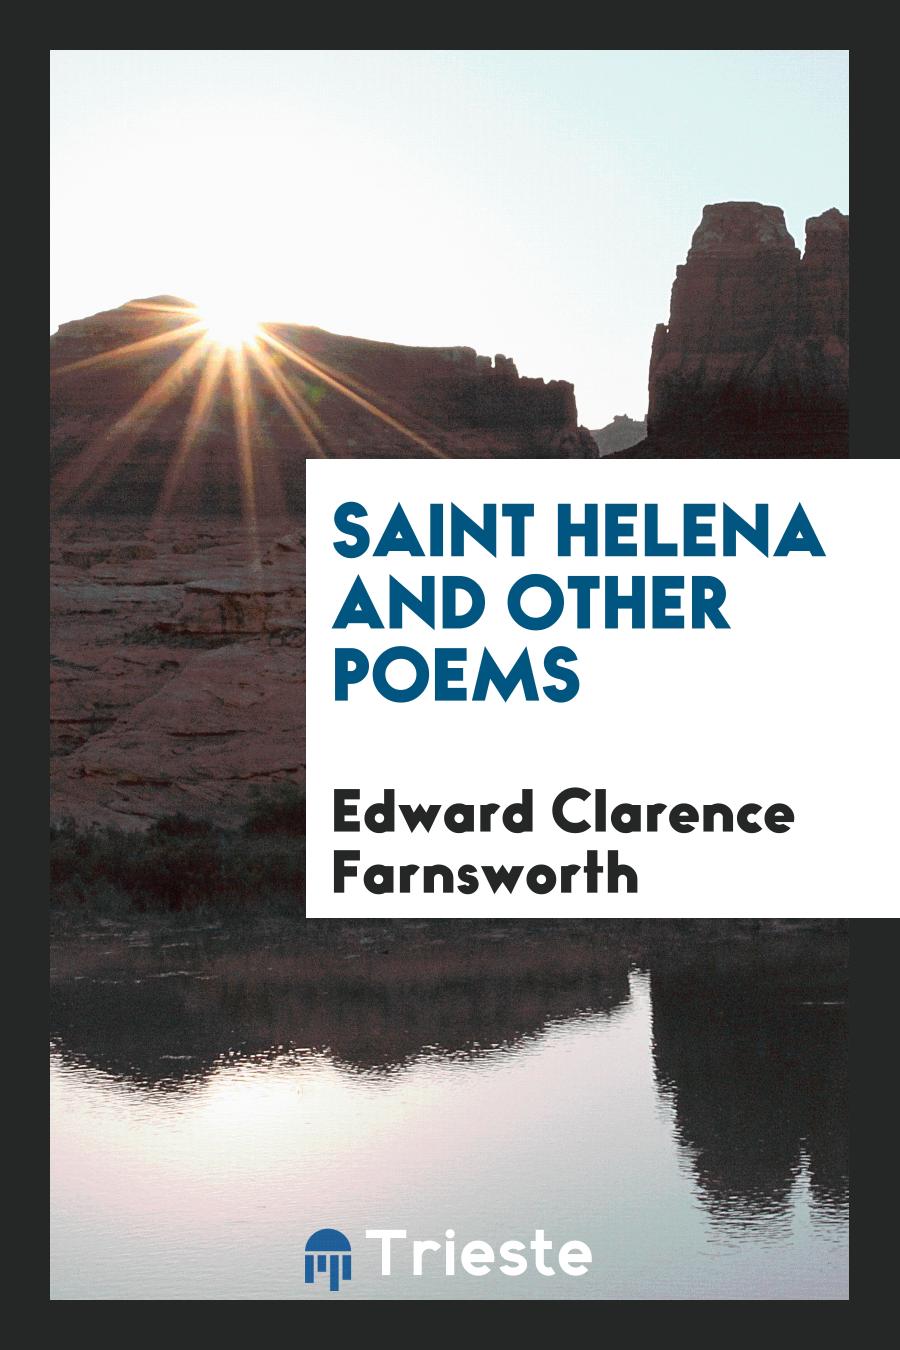 Saint Helena and other poems